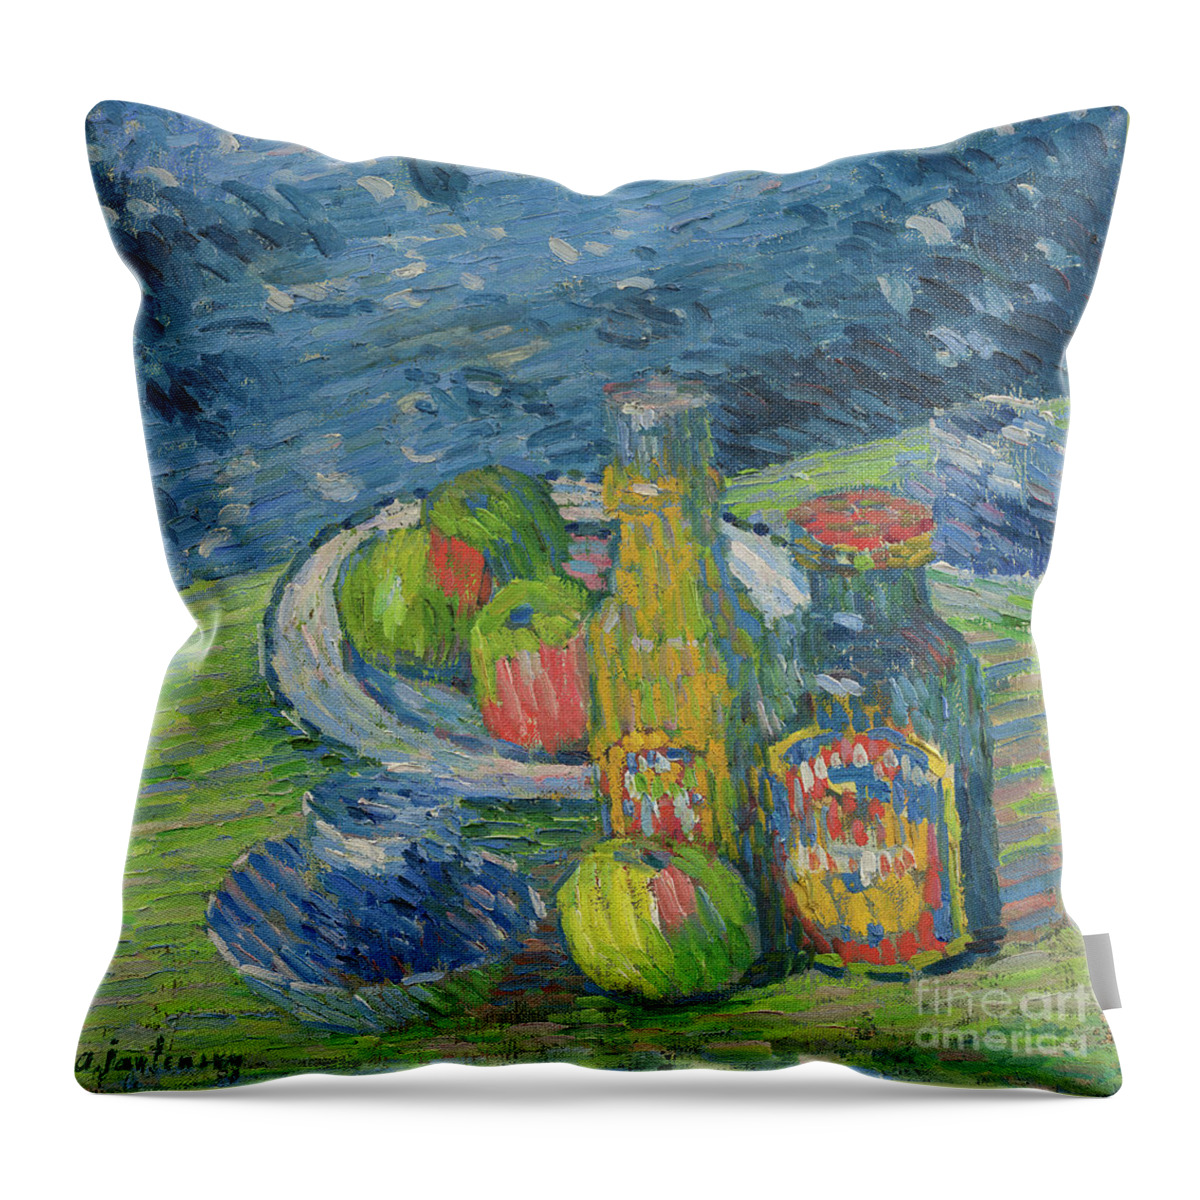 Jawlensky Throw Pillow featuring the painting Still Life with Bottles and Fruit, 1900 by Alexej von Jawlensky